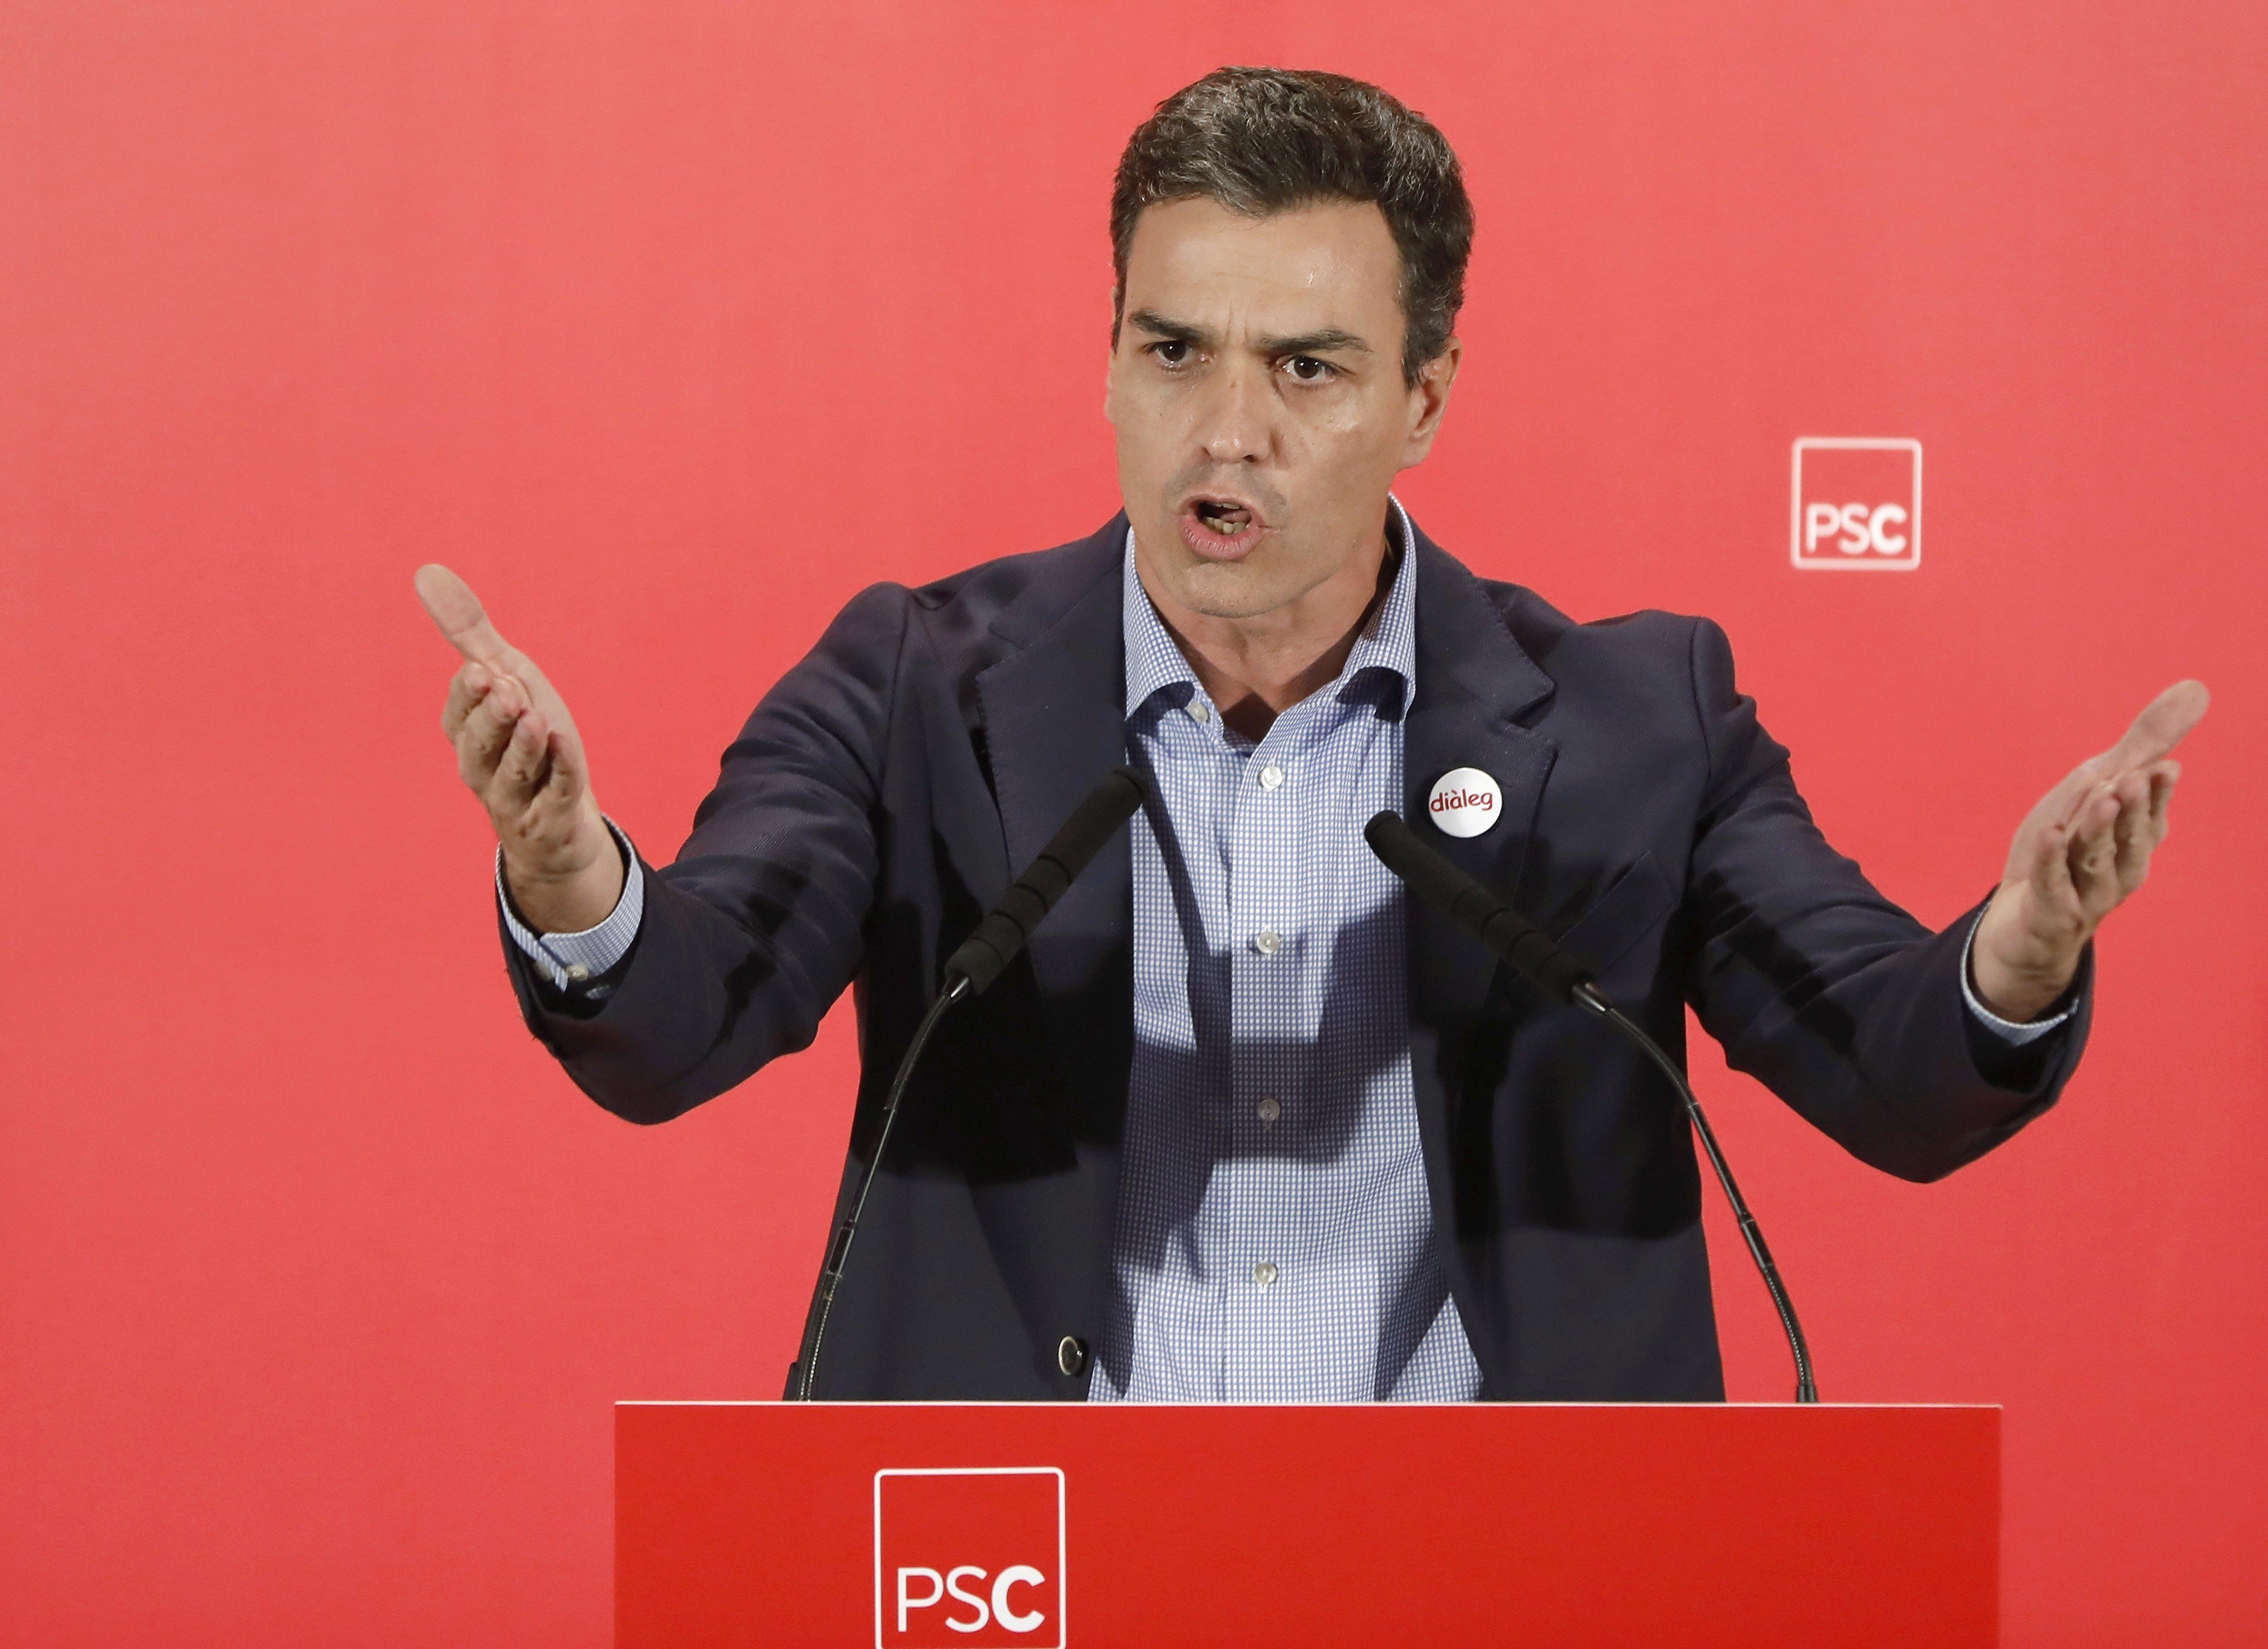 Opposition leader agrees with Rajoy to debate constitutional reform